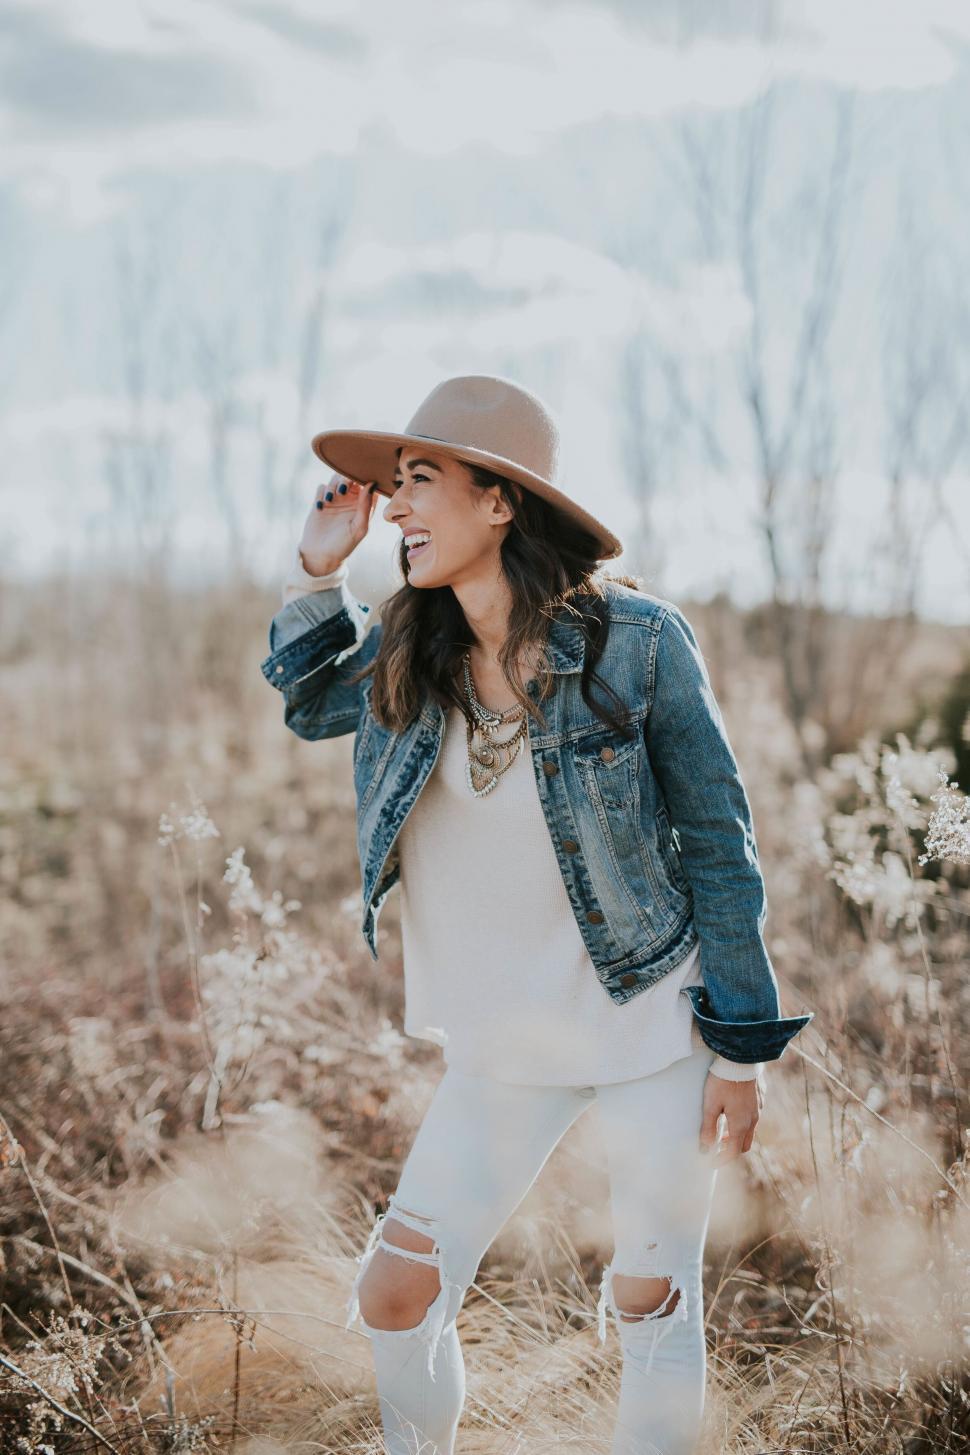 Free Image of Stylish woman in field with blurred face 